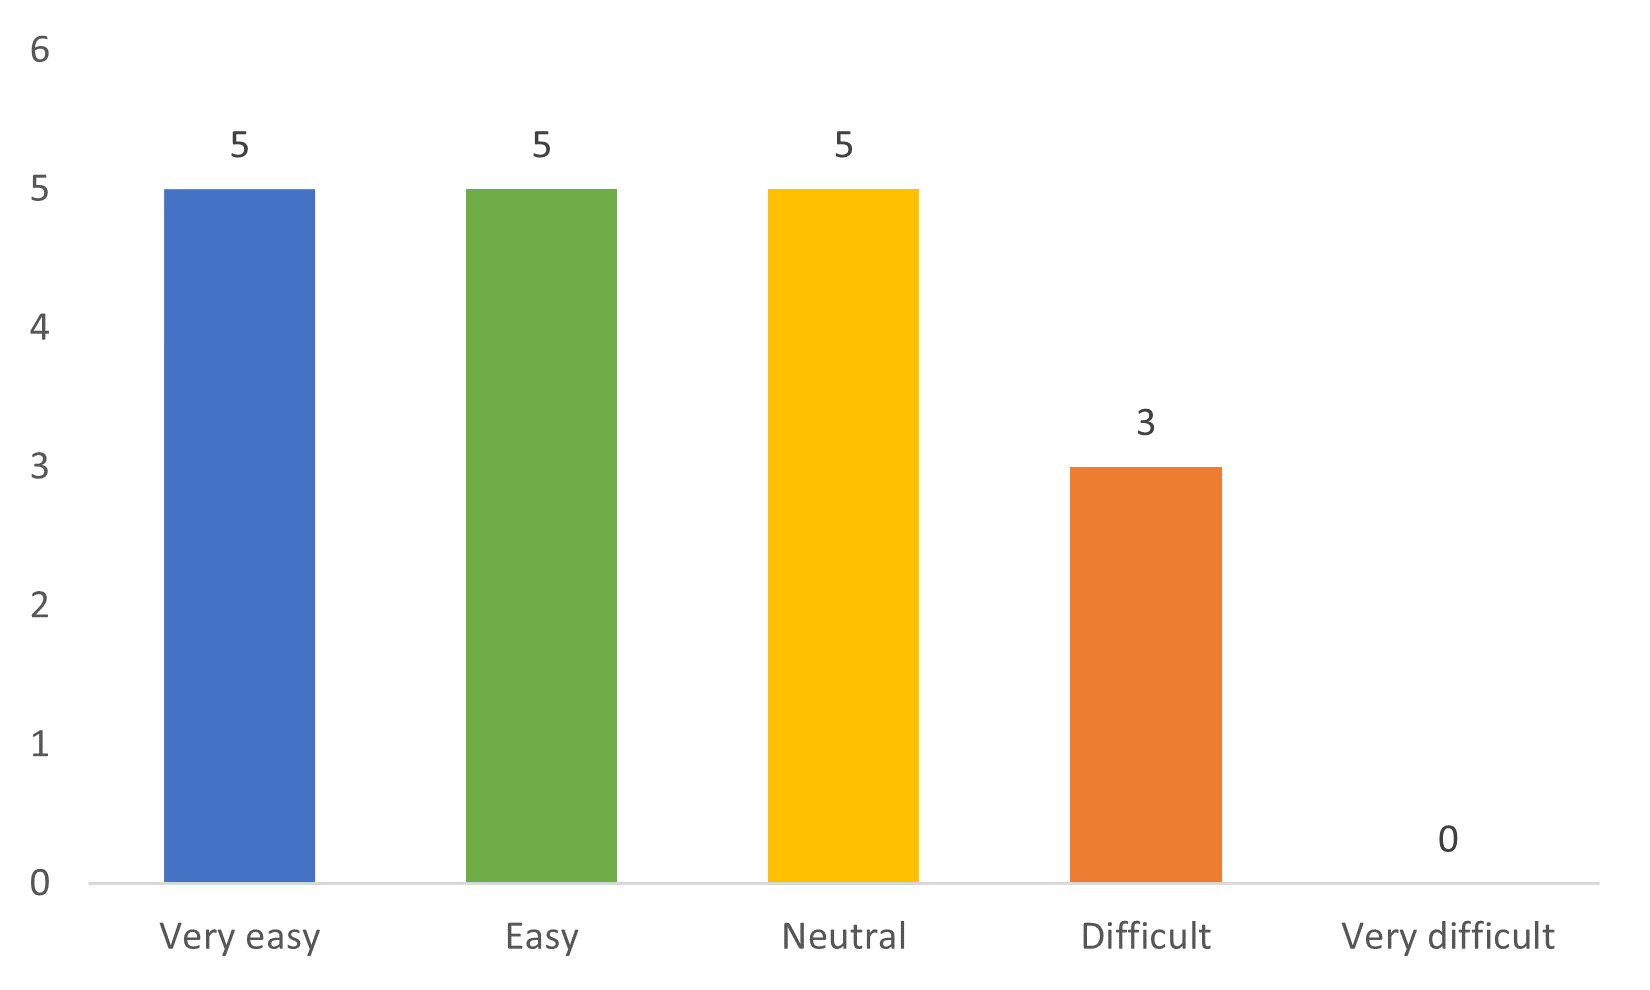 Bar chart showing 5 respondents answered "Very Easy," 5 answered "Easy," 5 answered "Neutral," 3 answered "Difficult" and 0 answered "Very difficult"